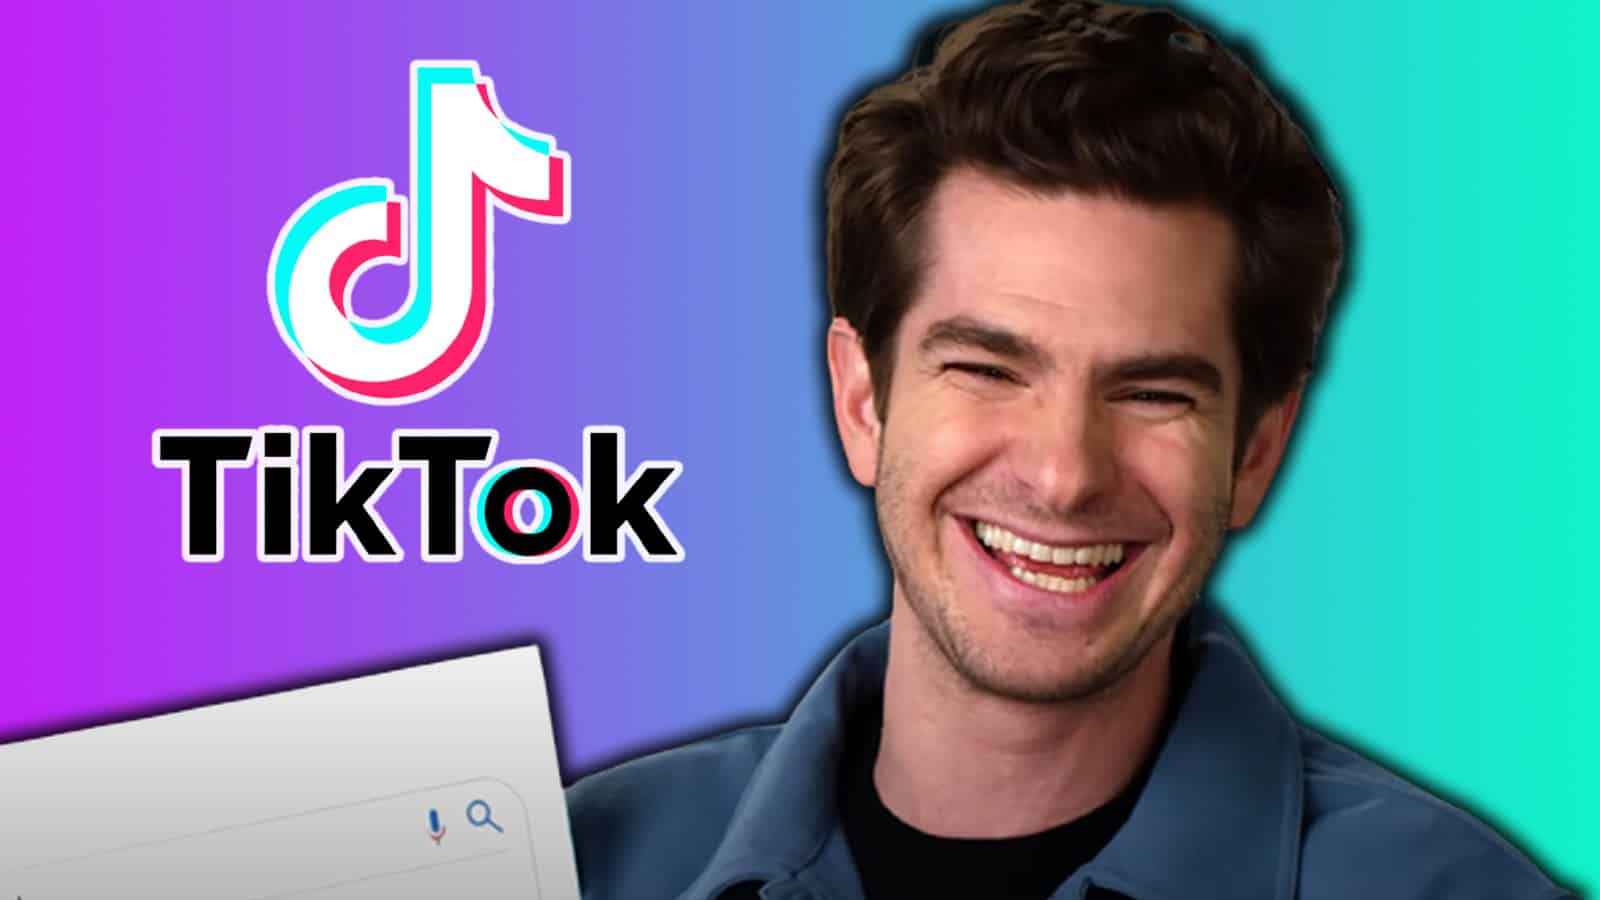 Andrew Garfield laughing clip goes viral on TikTok